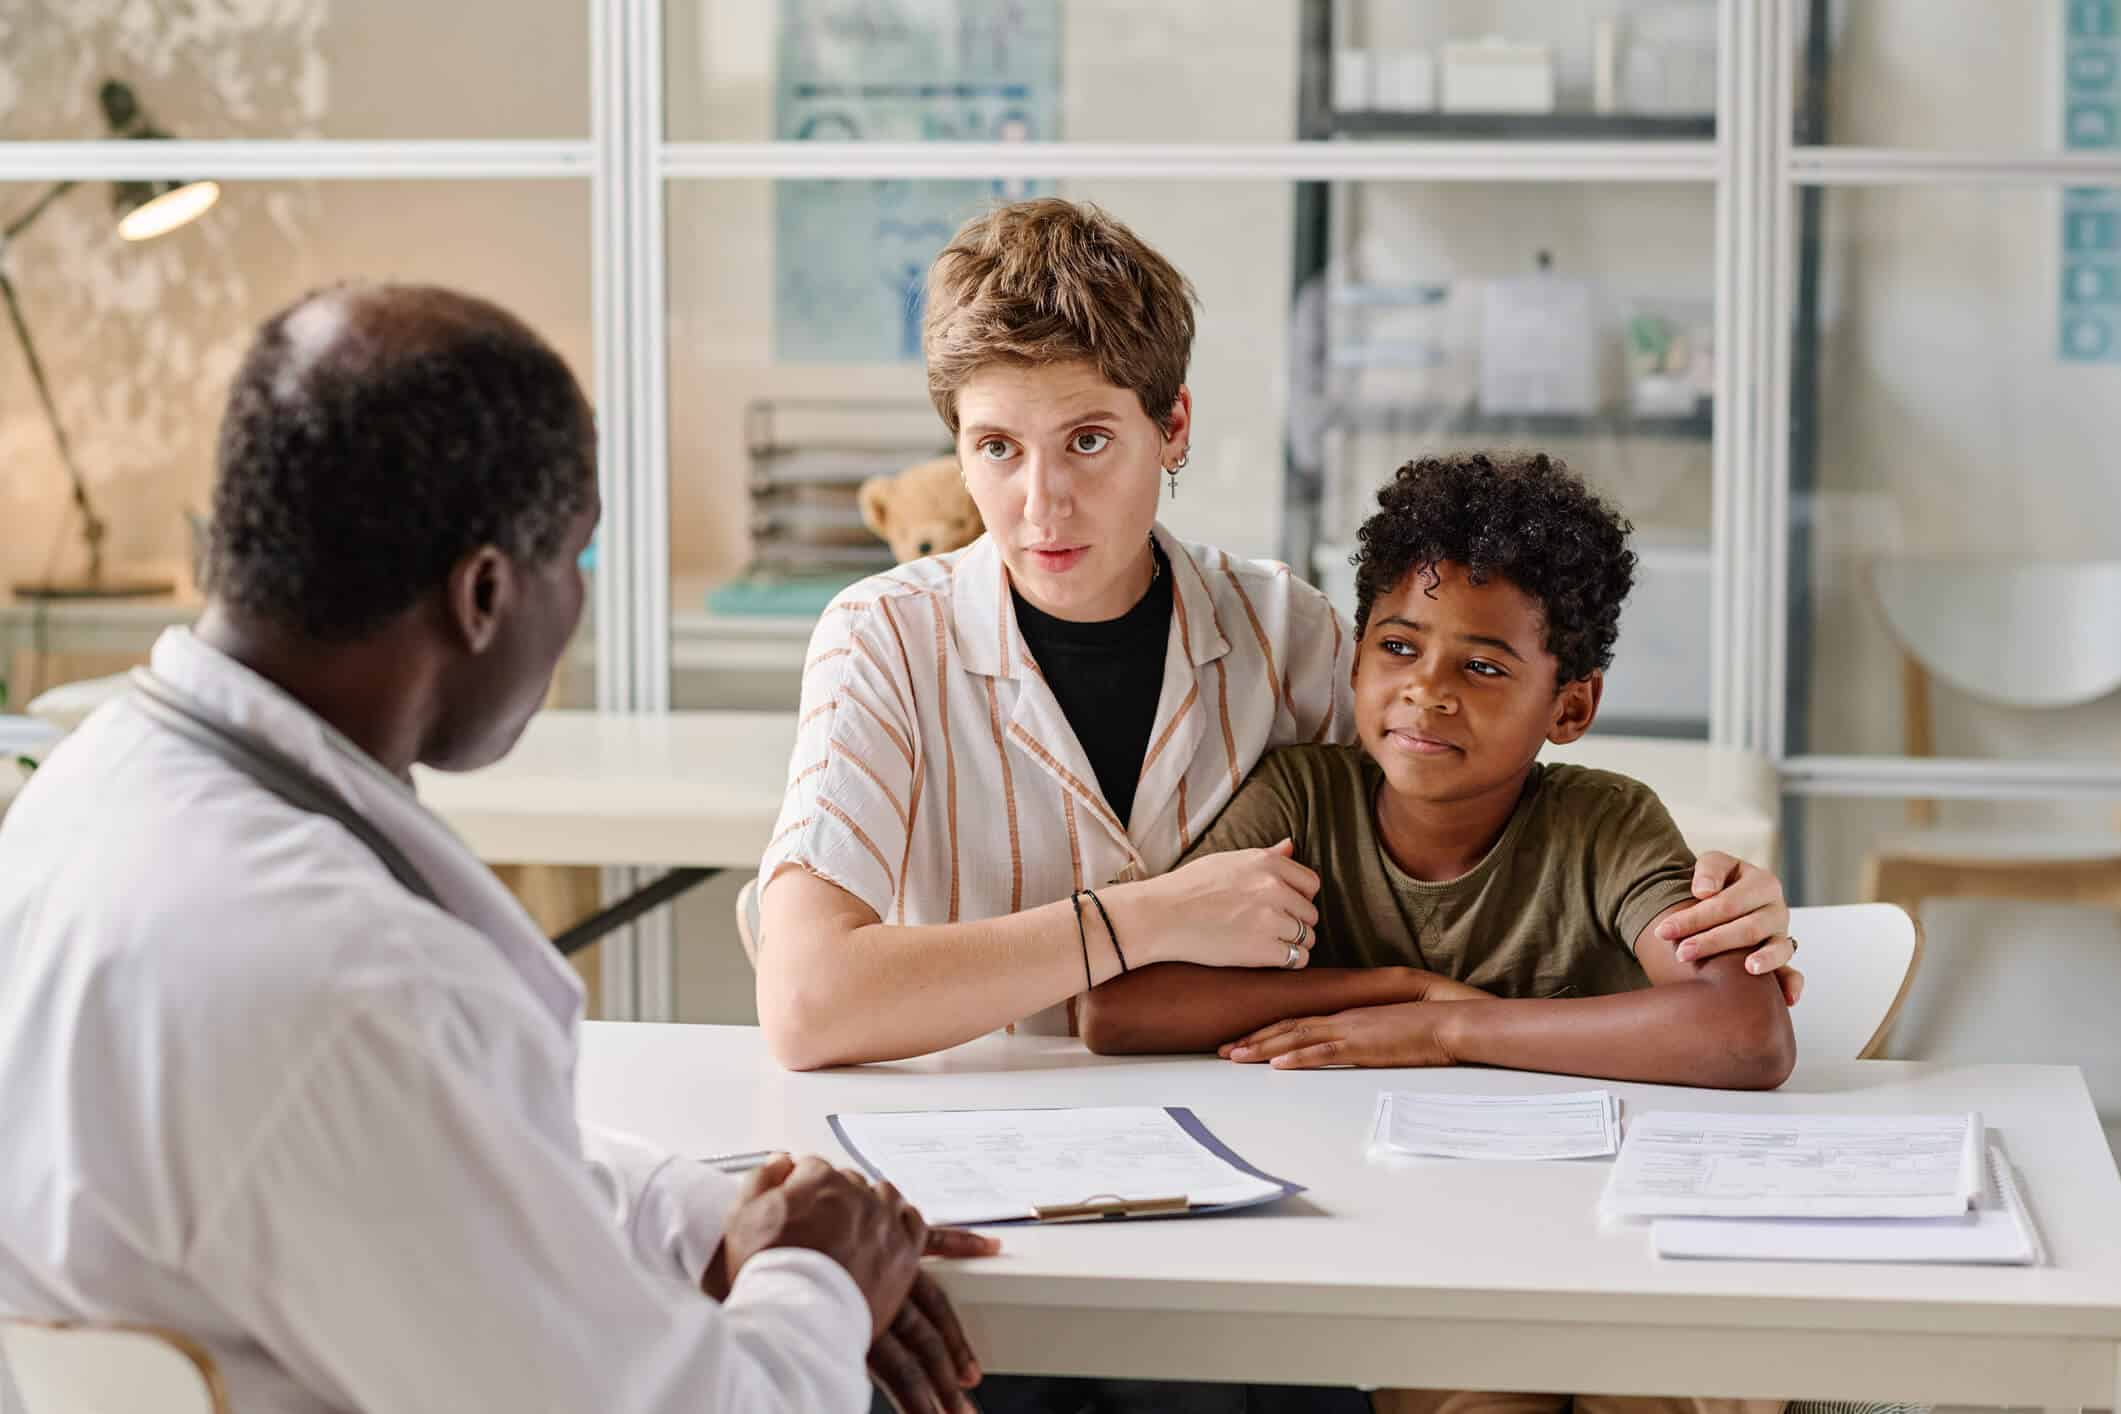 A woman and a young kid sits at a table in front of a therapist during an in person visit